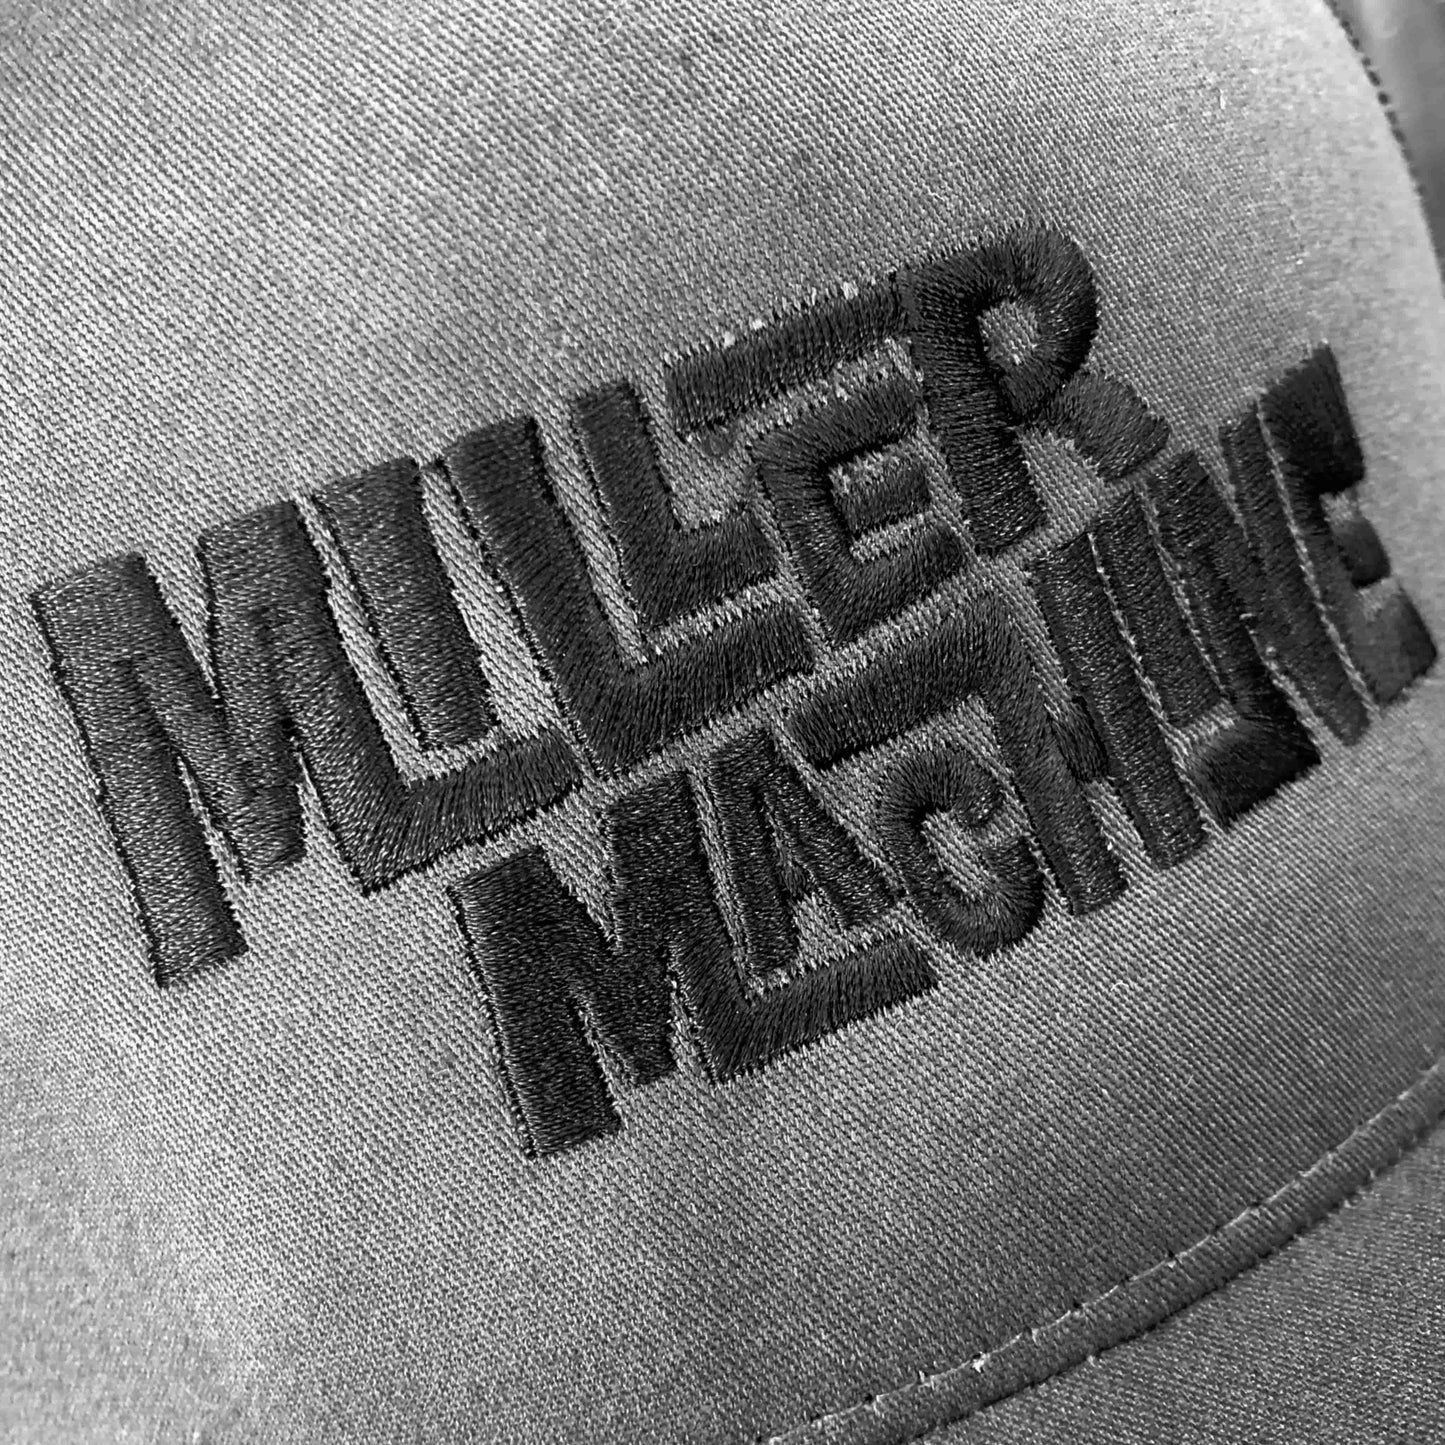 Closeup photo of "Miller Machine" cap with custom embroidered stitching.